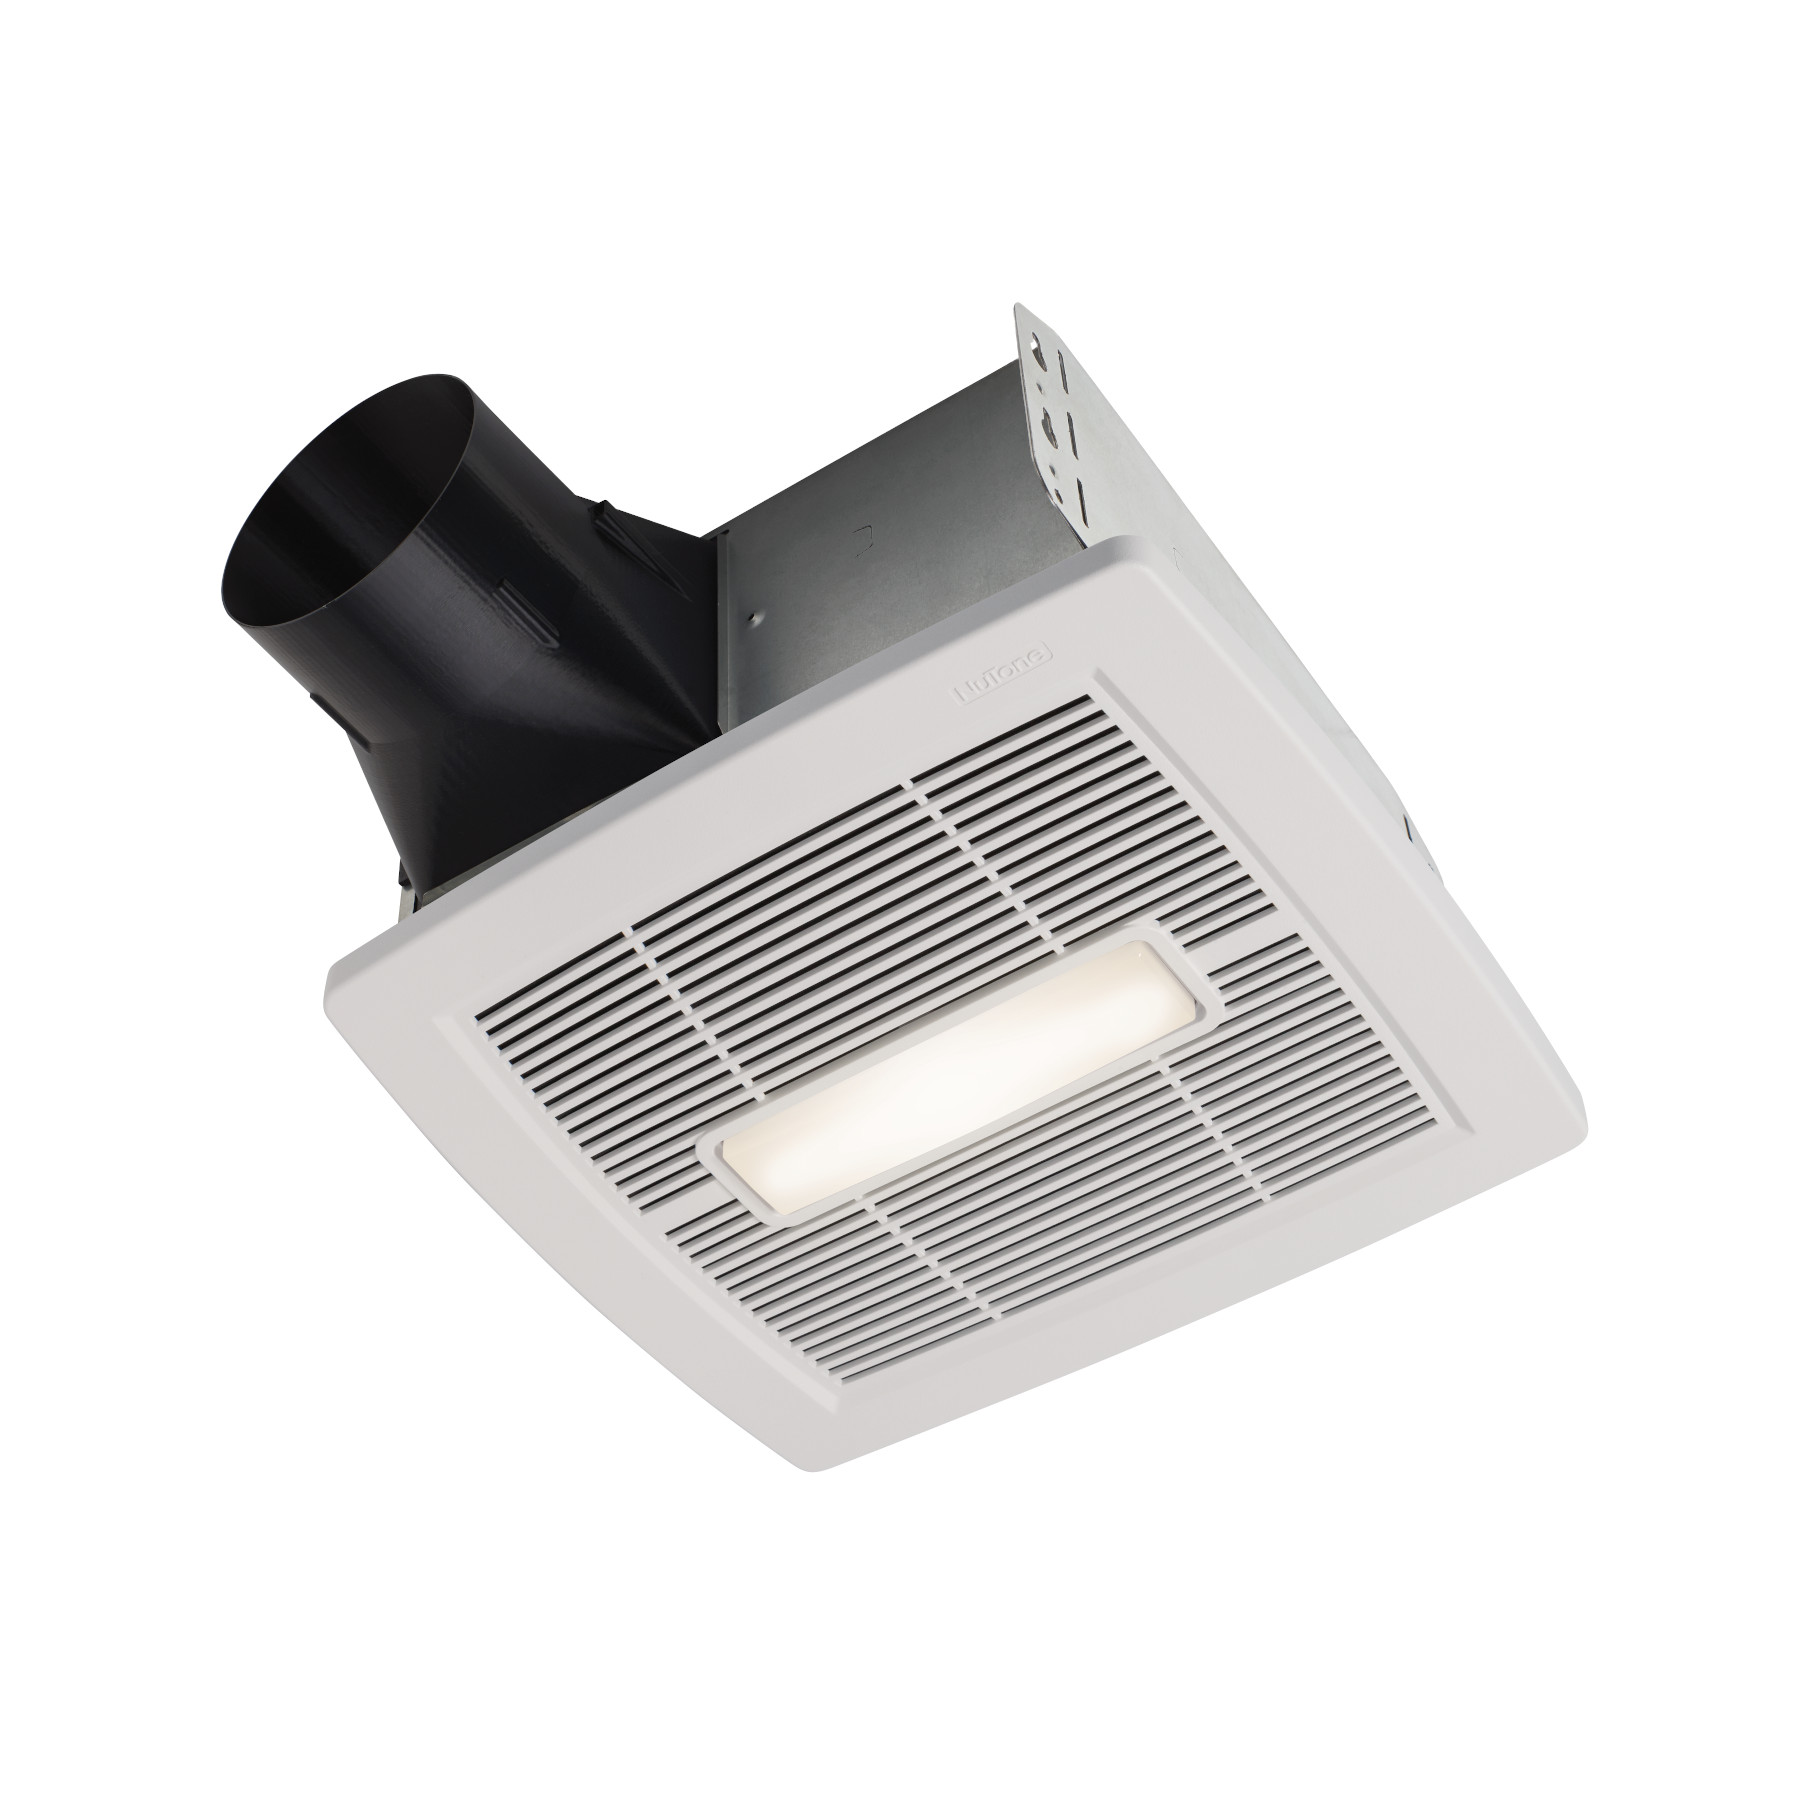 **DISCONTINUED** NuTone®90 CFM Ventilation Fan with LED Light, 1.0 Sones; ENERGY STAR Certified